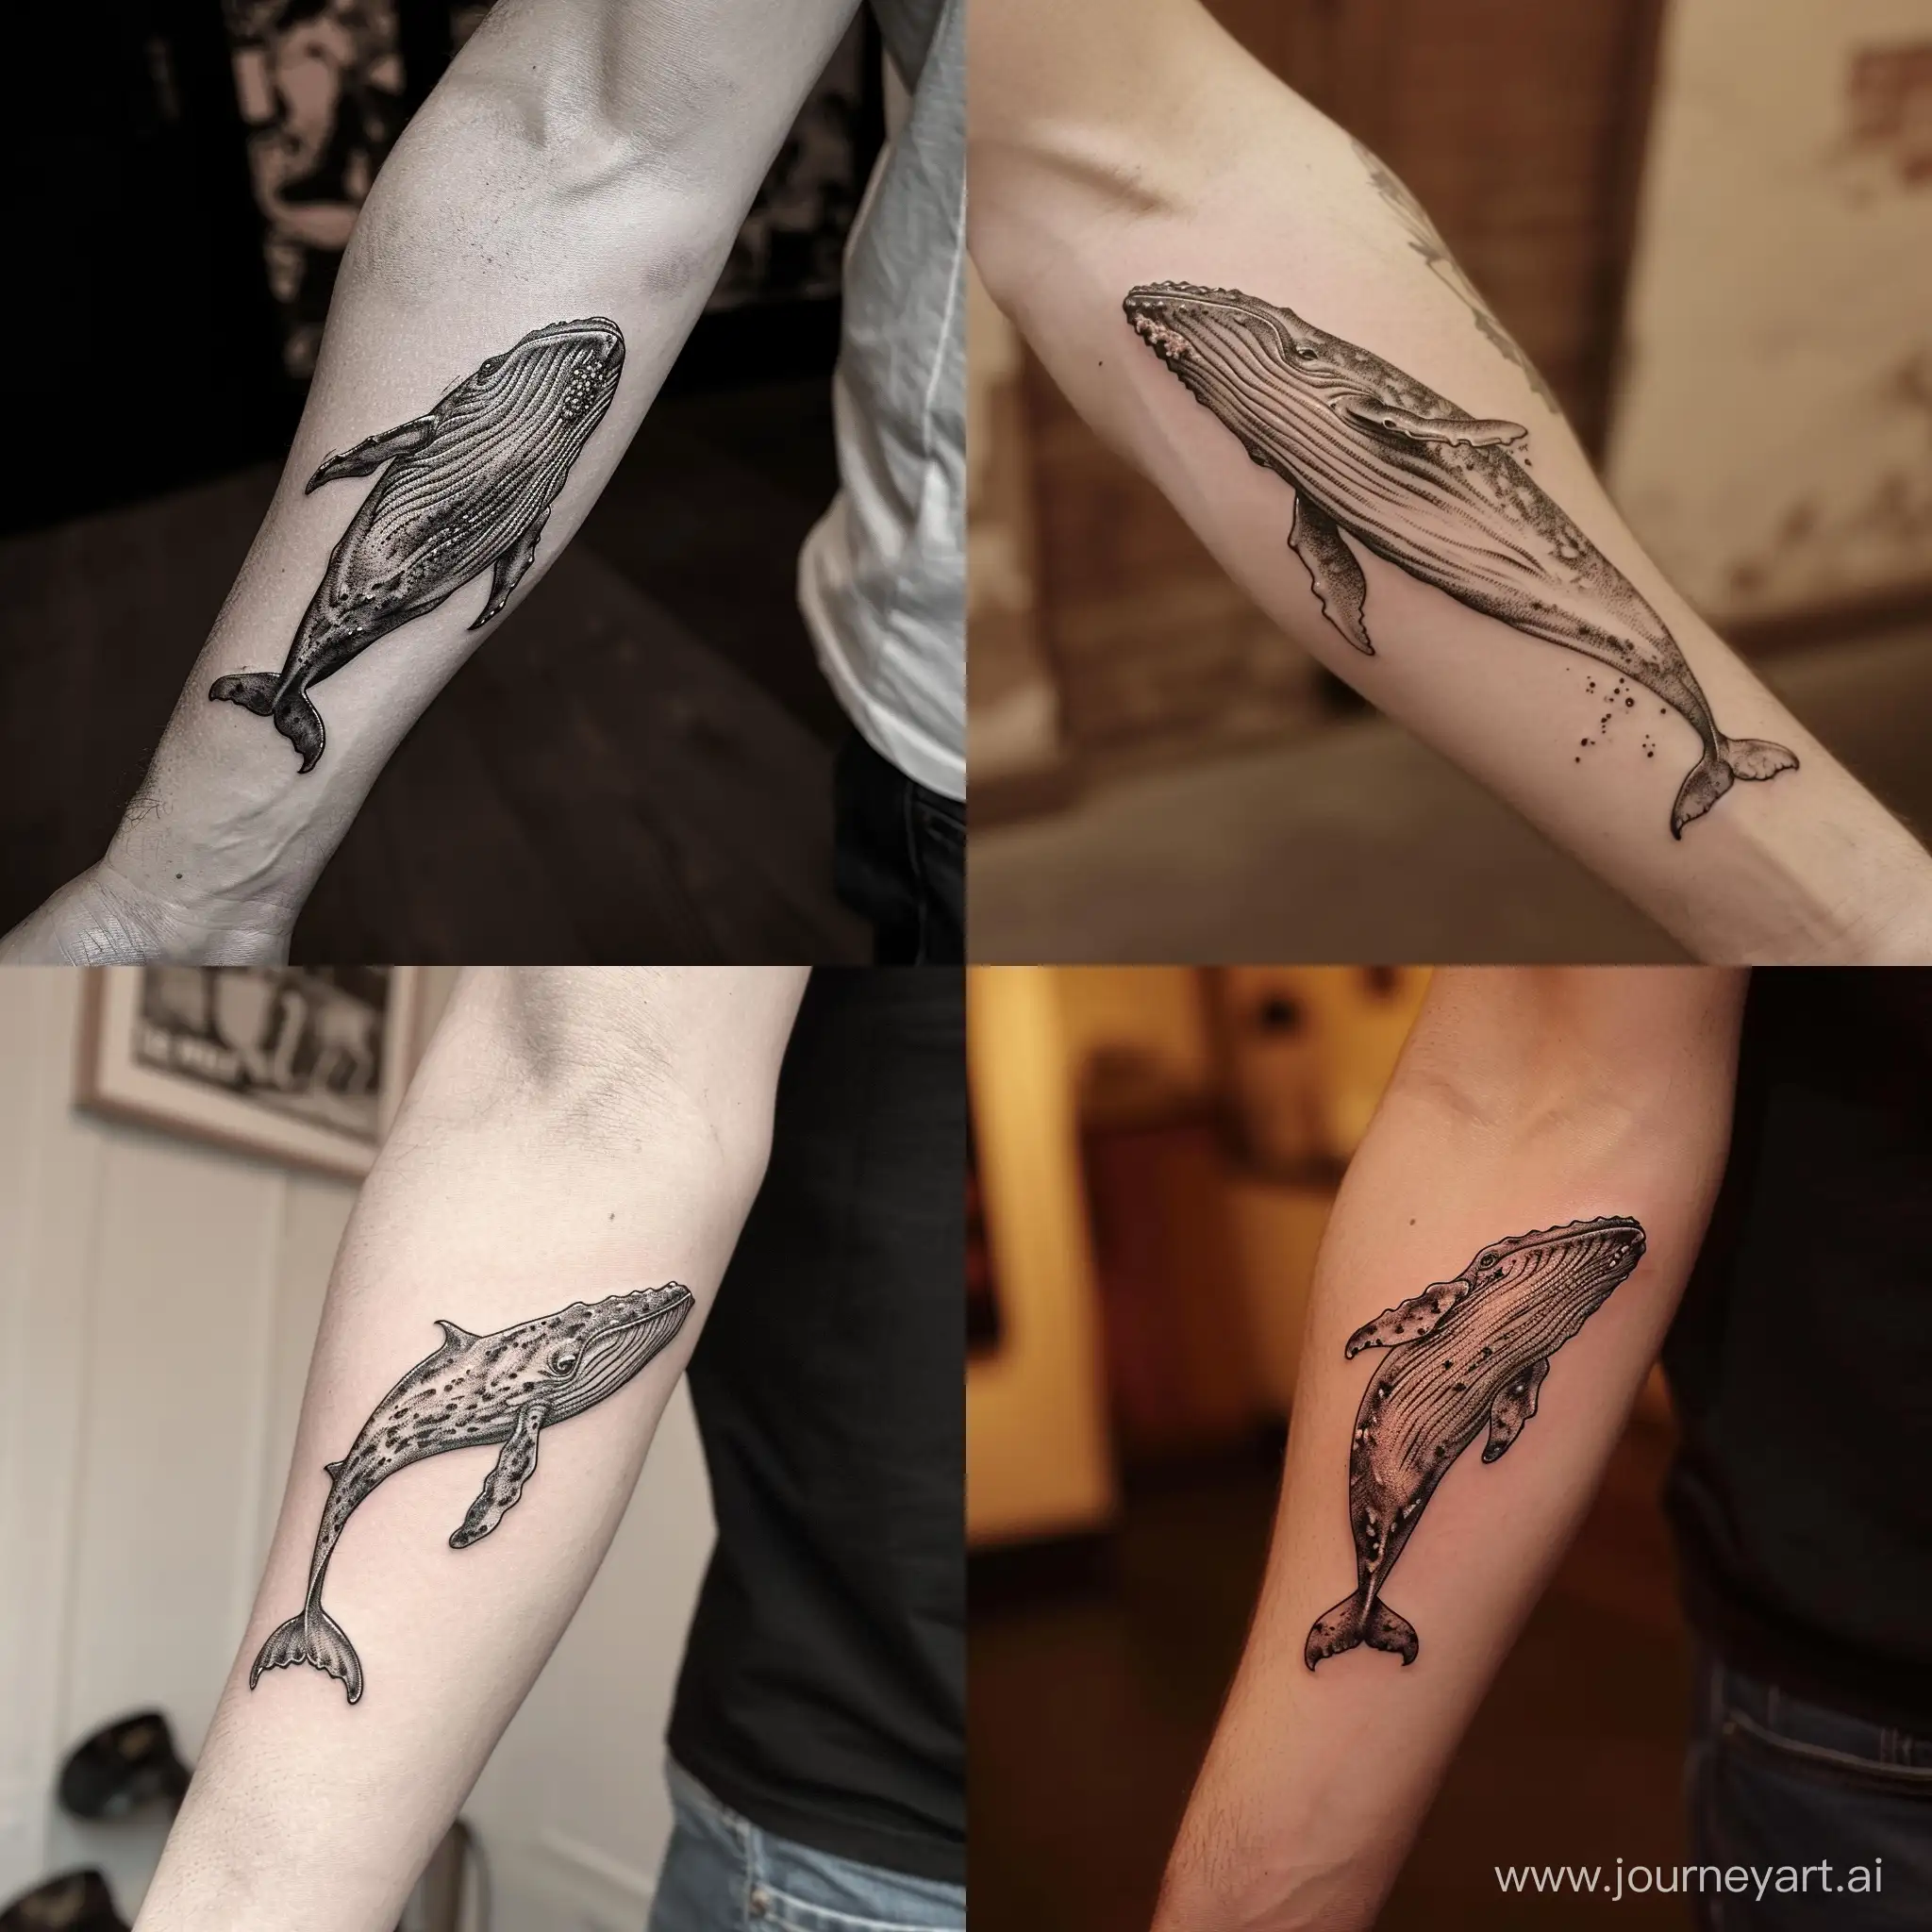 Hyperrealistic-Whale-Forearm-Tattoo-with-Whip-Shading